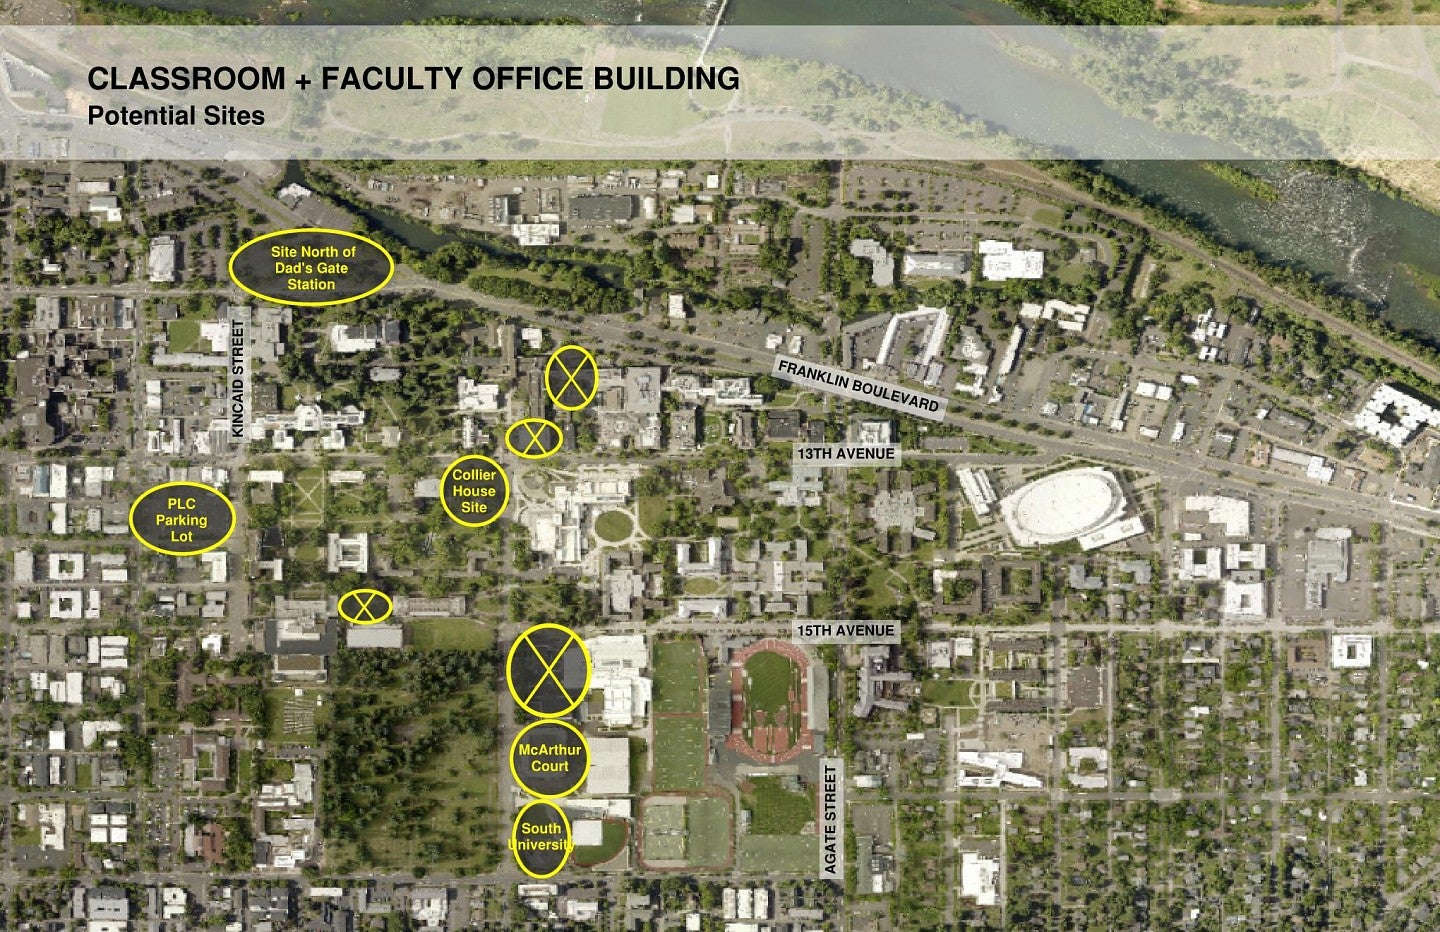 Classroom and Faculty Office Building Potential Sites